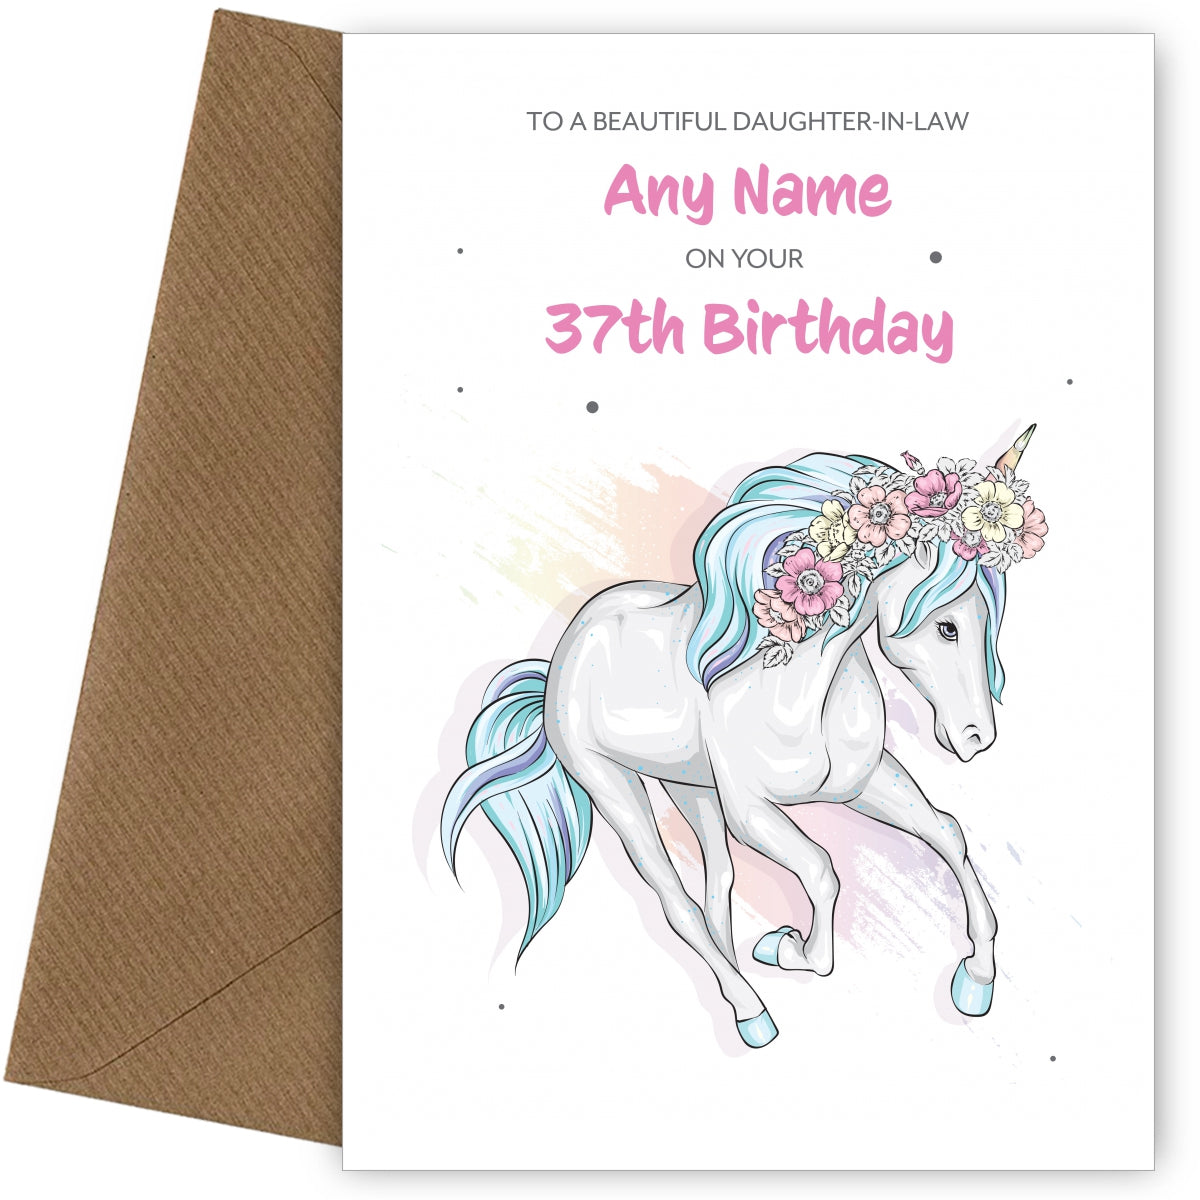 37th Birthday Card for Daughter-in-law - Beautiful Unicorn